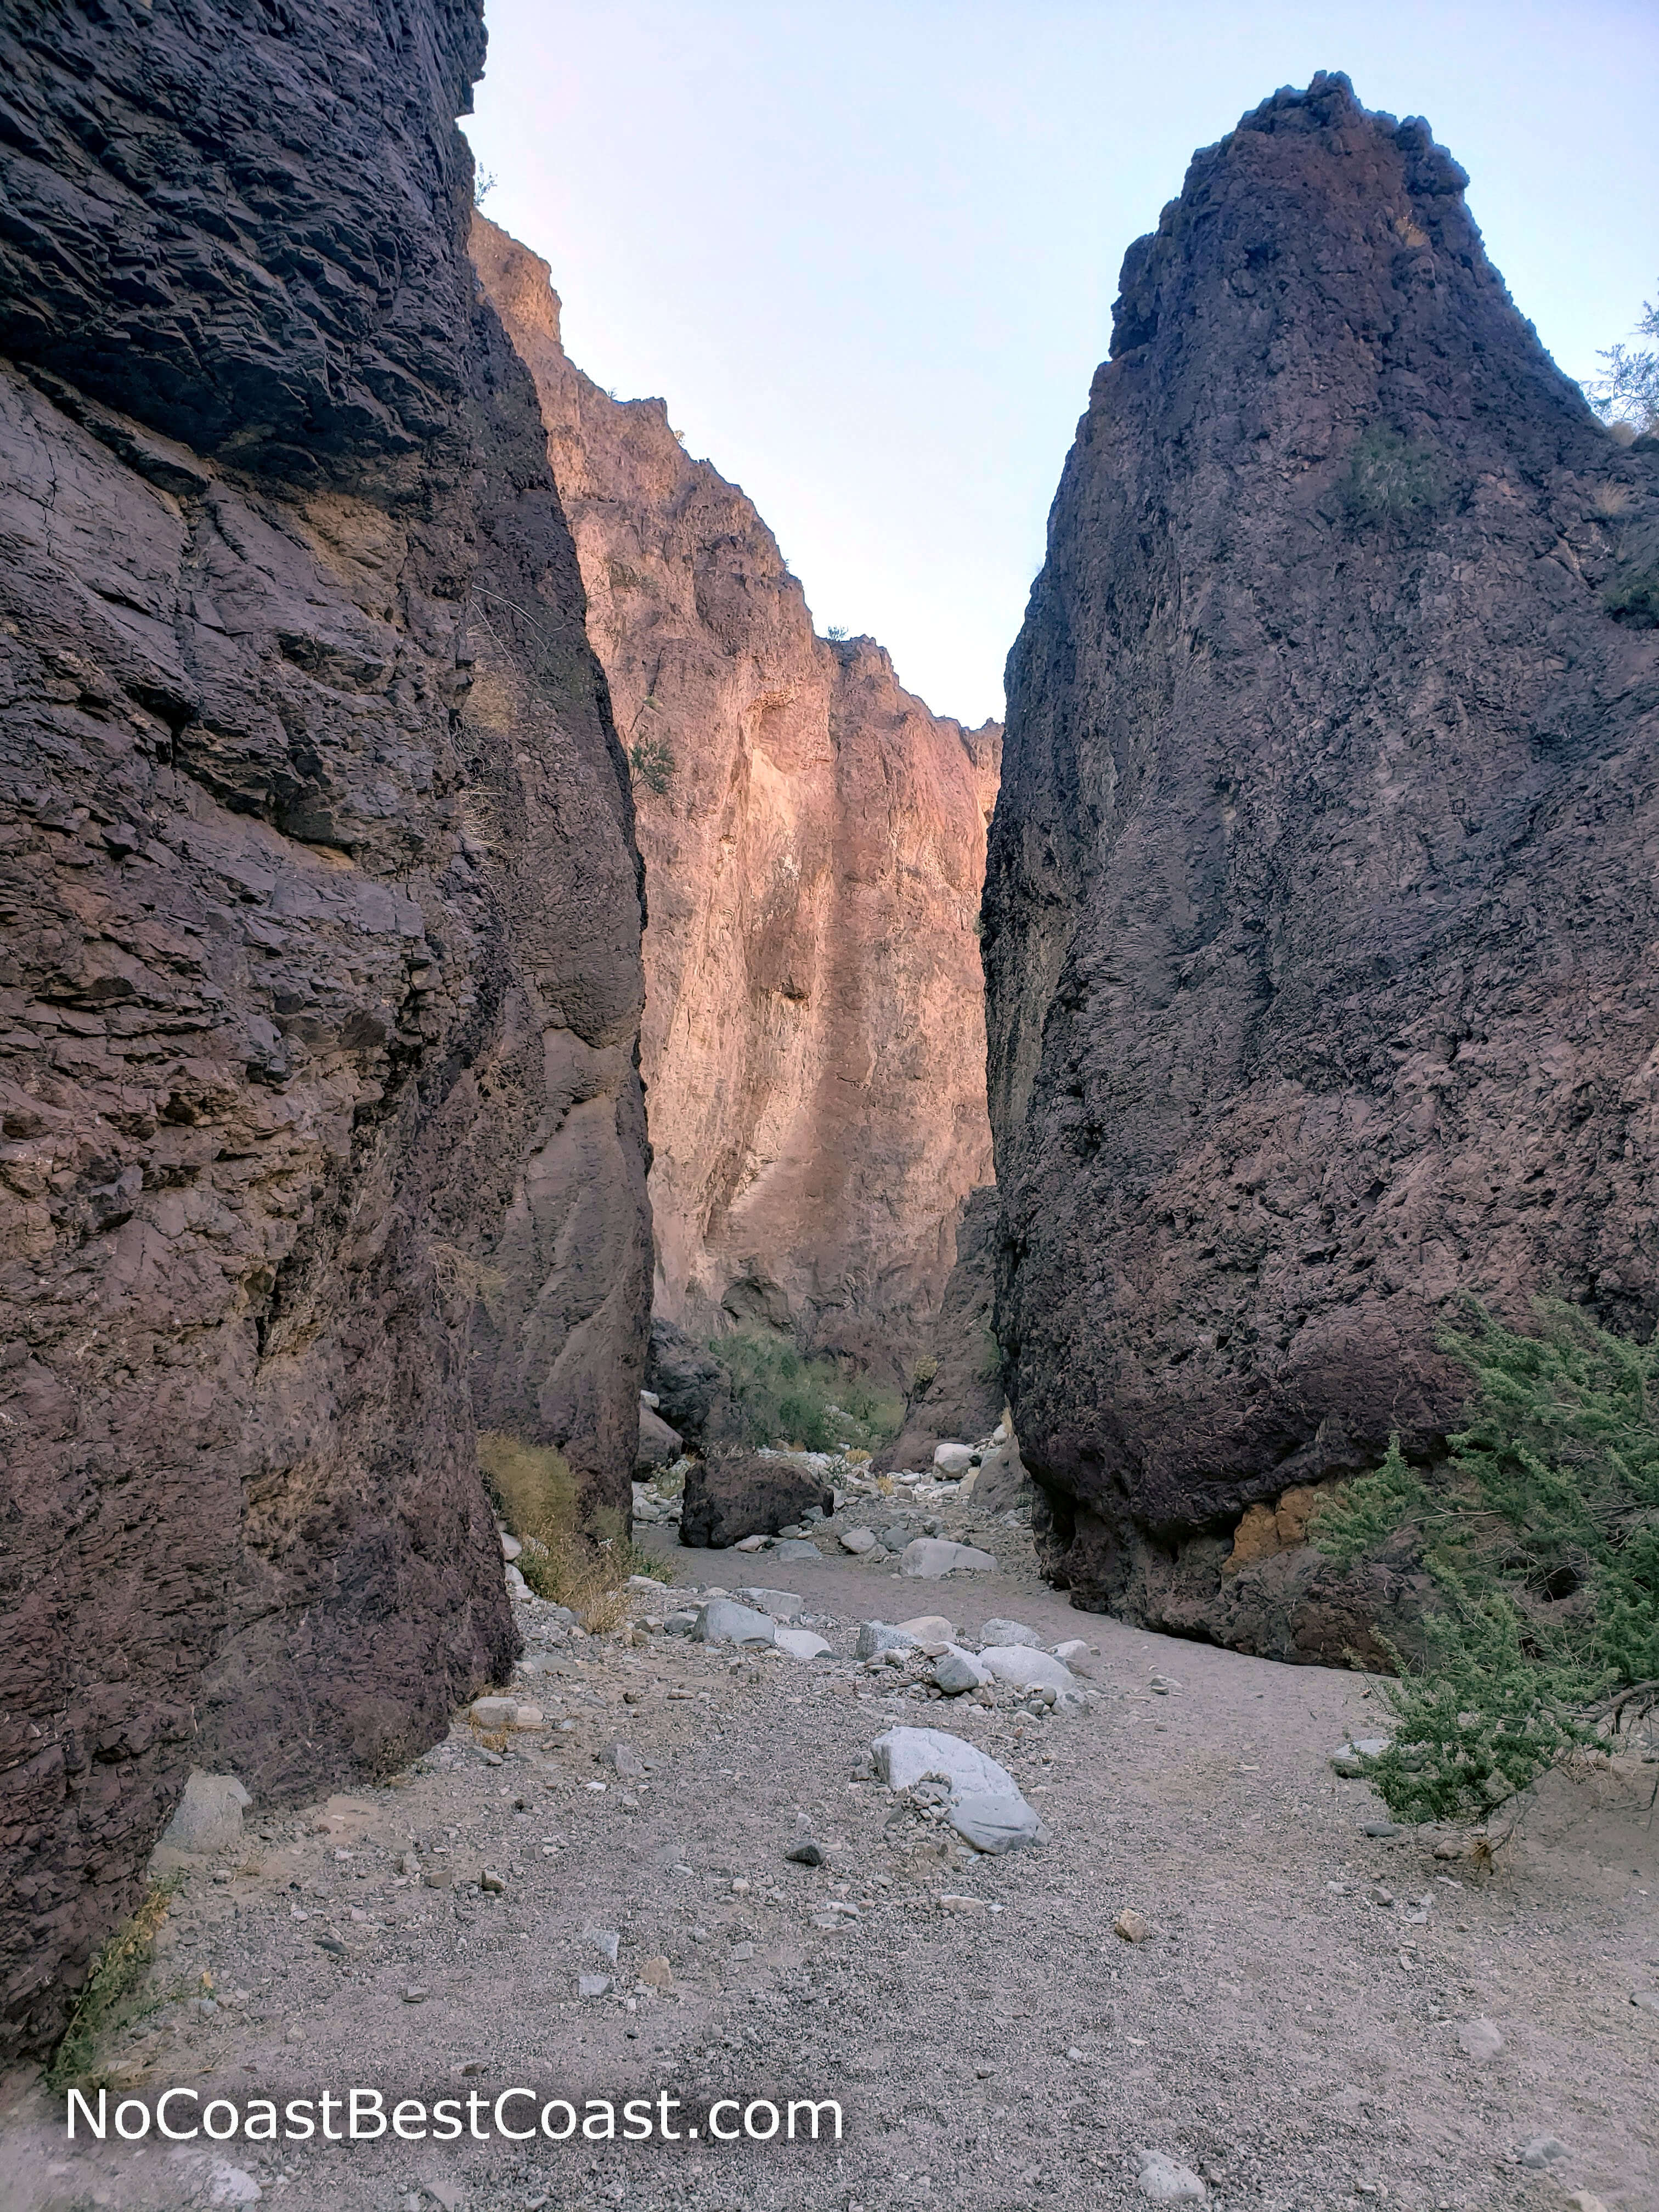 The slot canyon and it's vertical rock walls